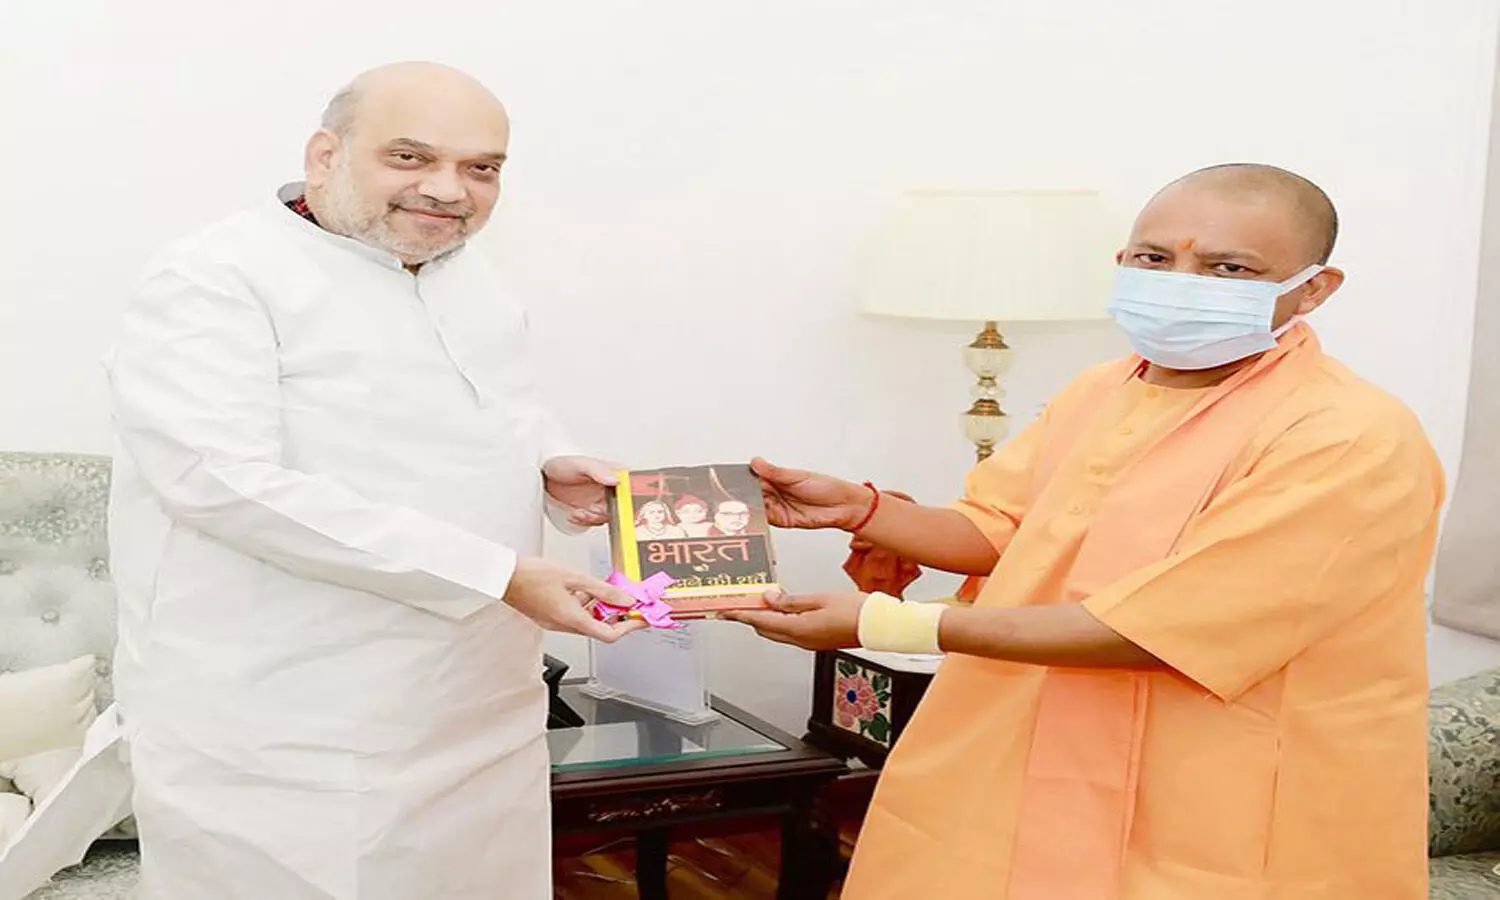 UP CM Adityanath pays courtesy call to Union Home Minister Amit Shah in Delhi